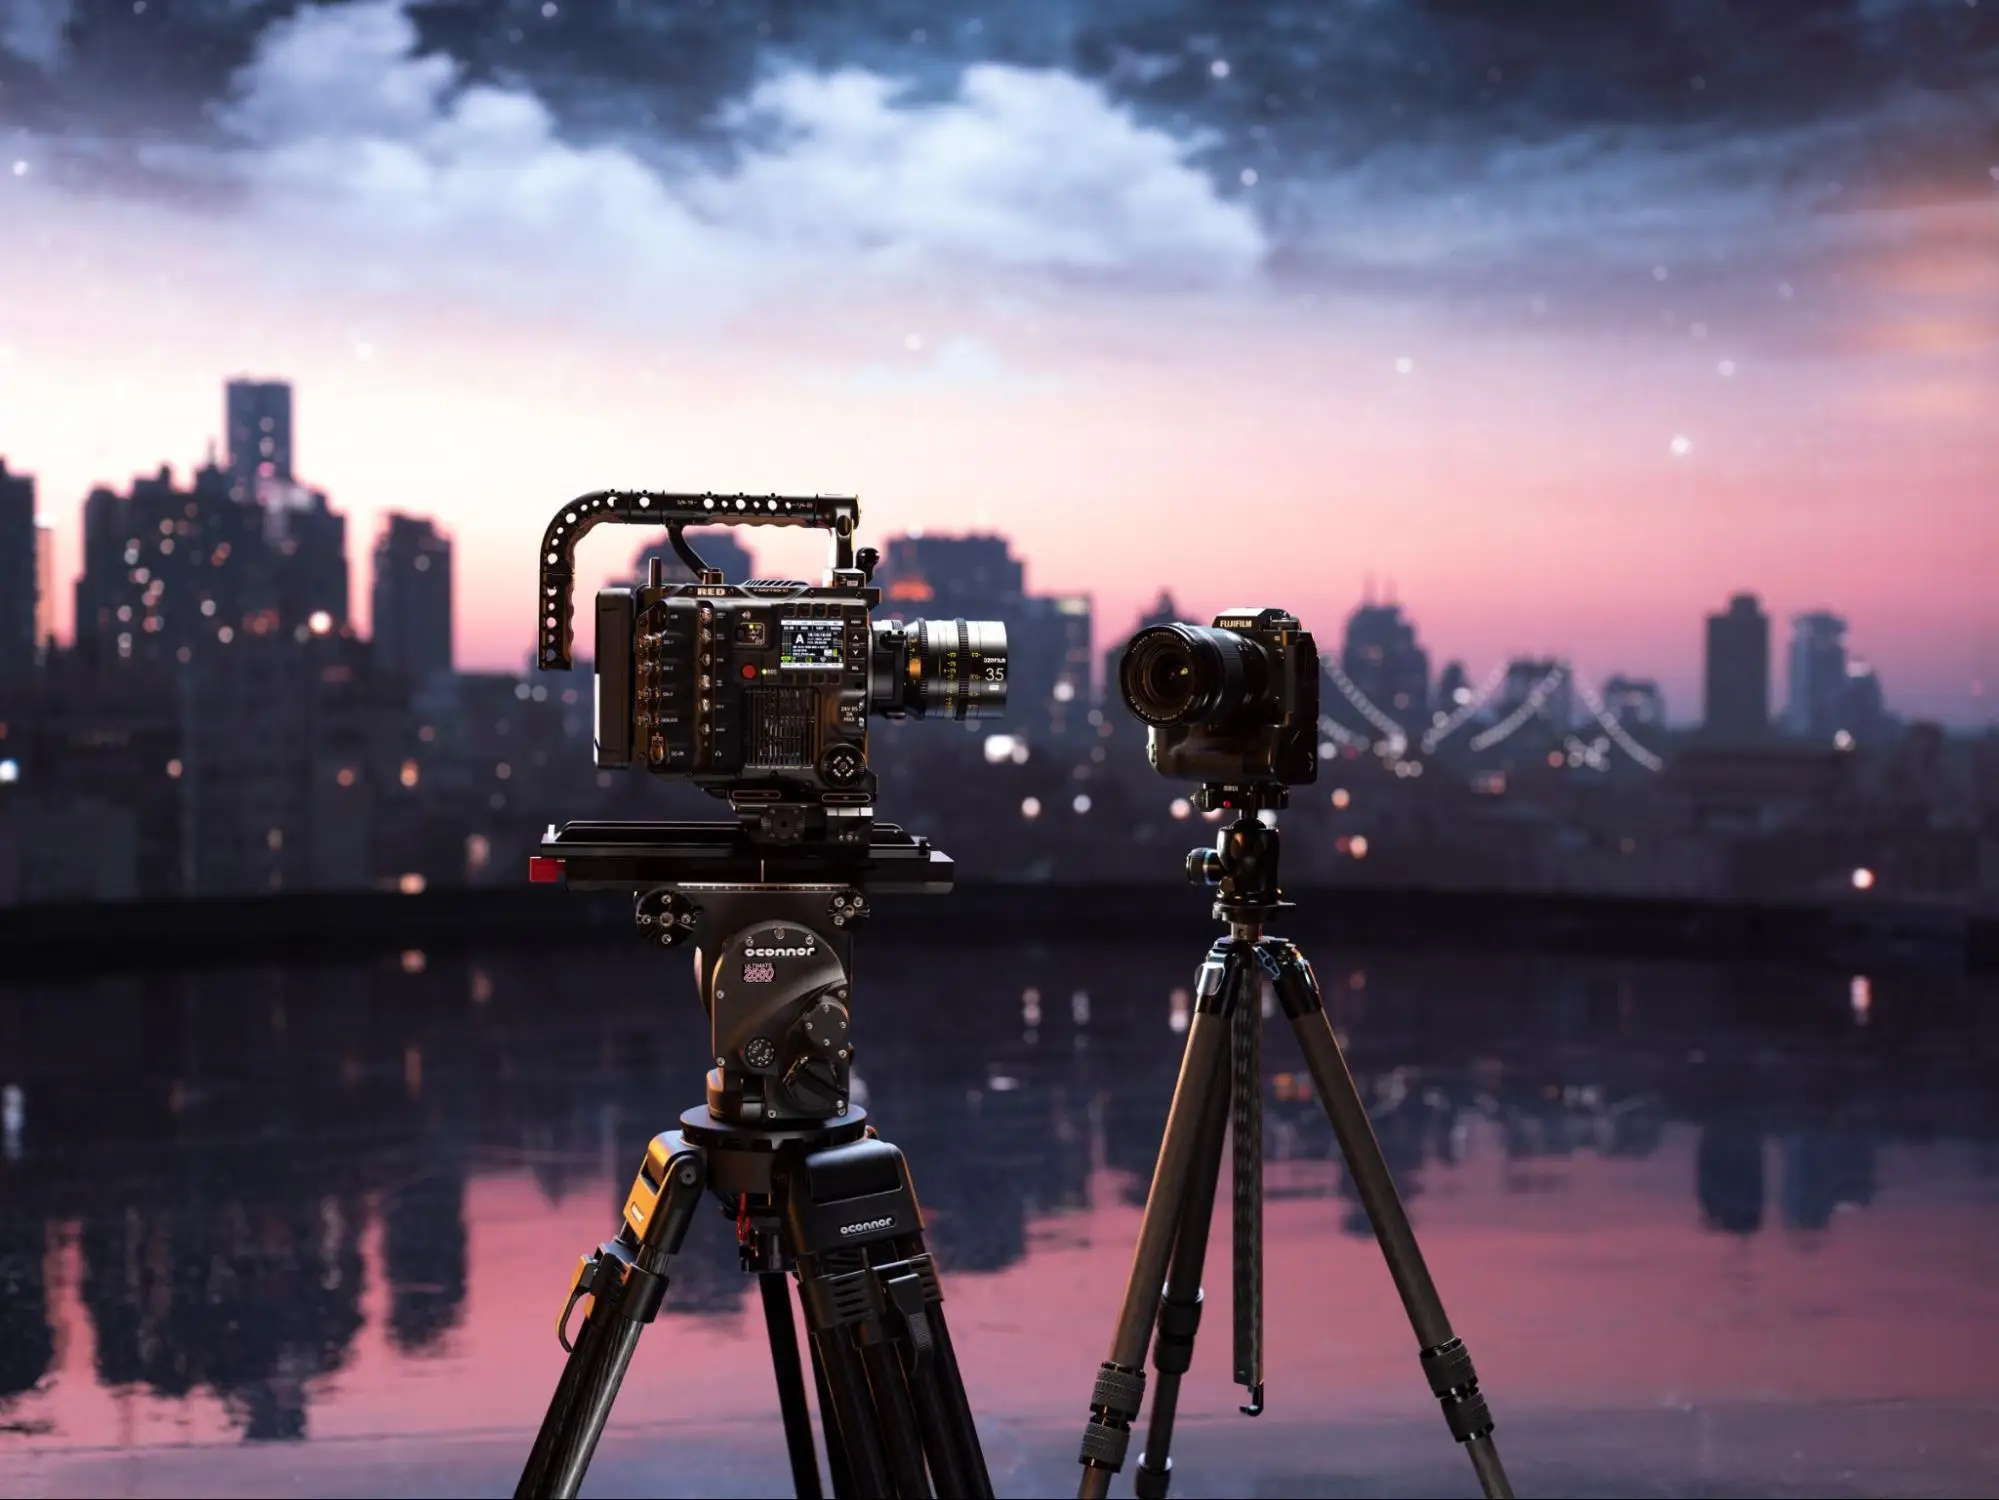 Image of two cameras on tripods with a skyline in the background.